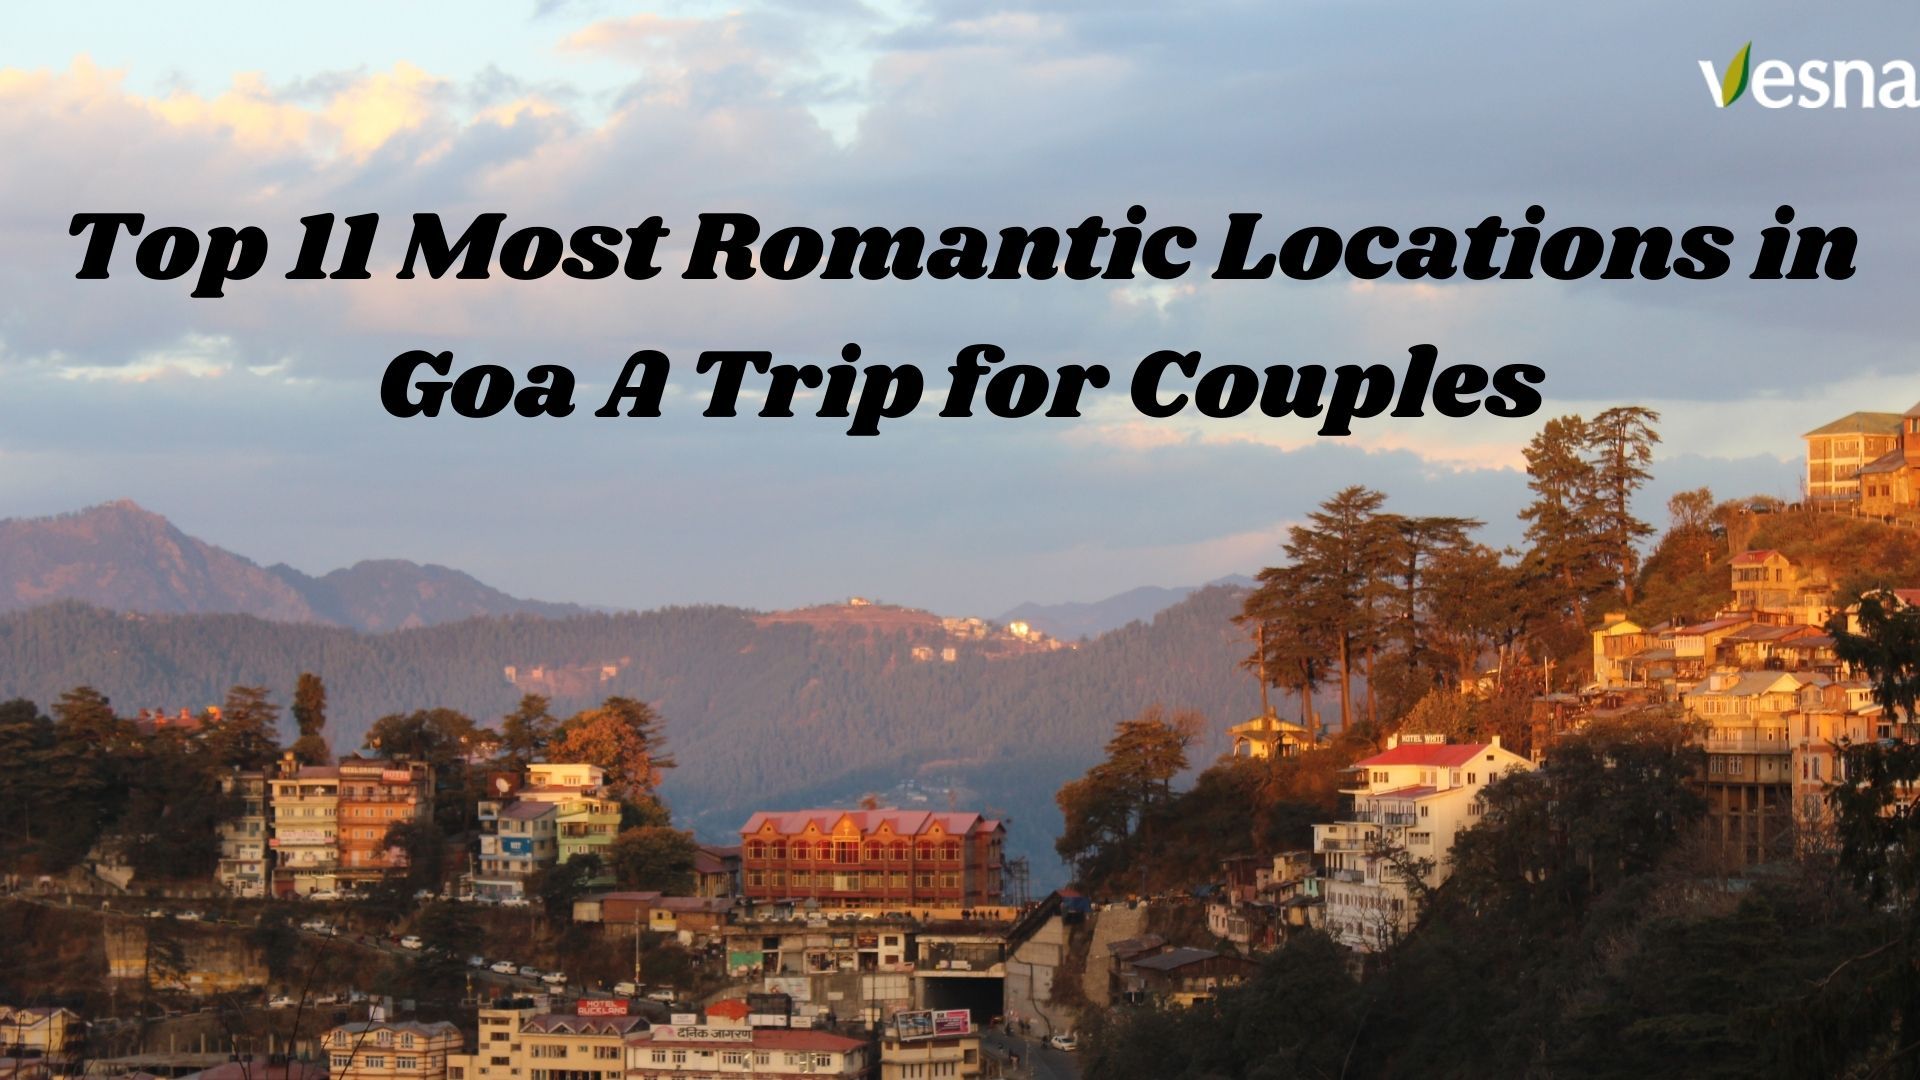 Top 11 Most Romantic Locations in Goa A Trip for Couples